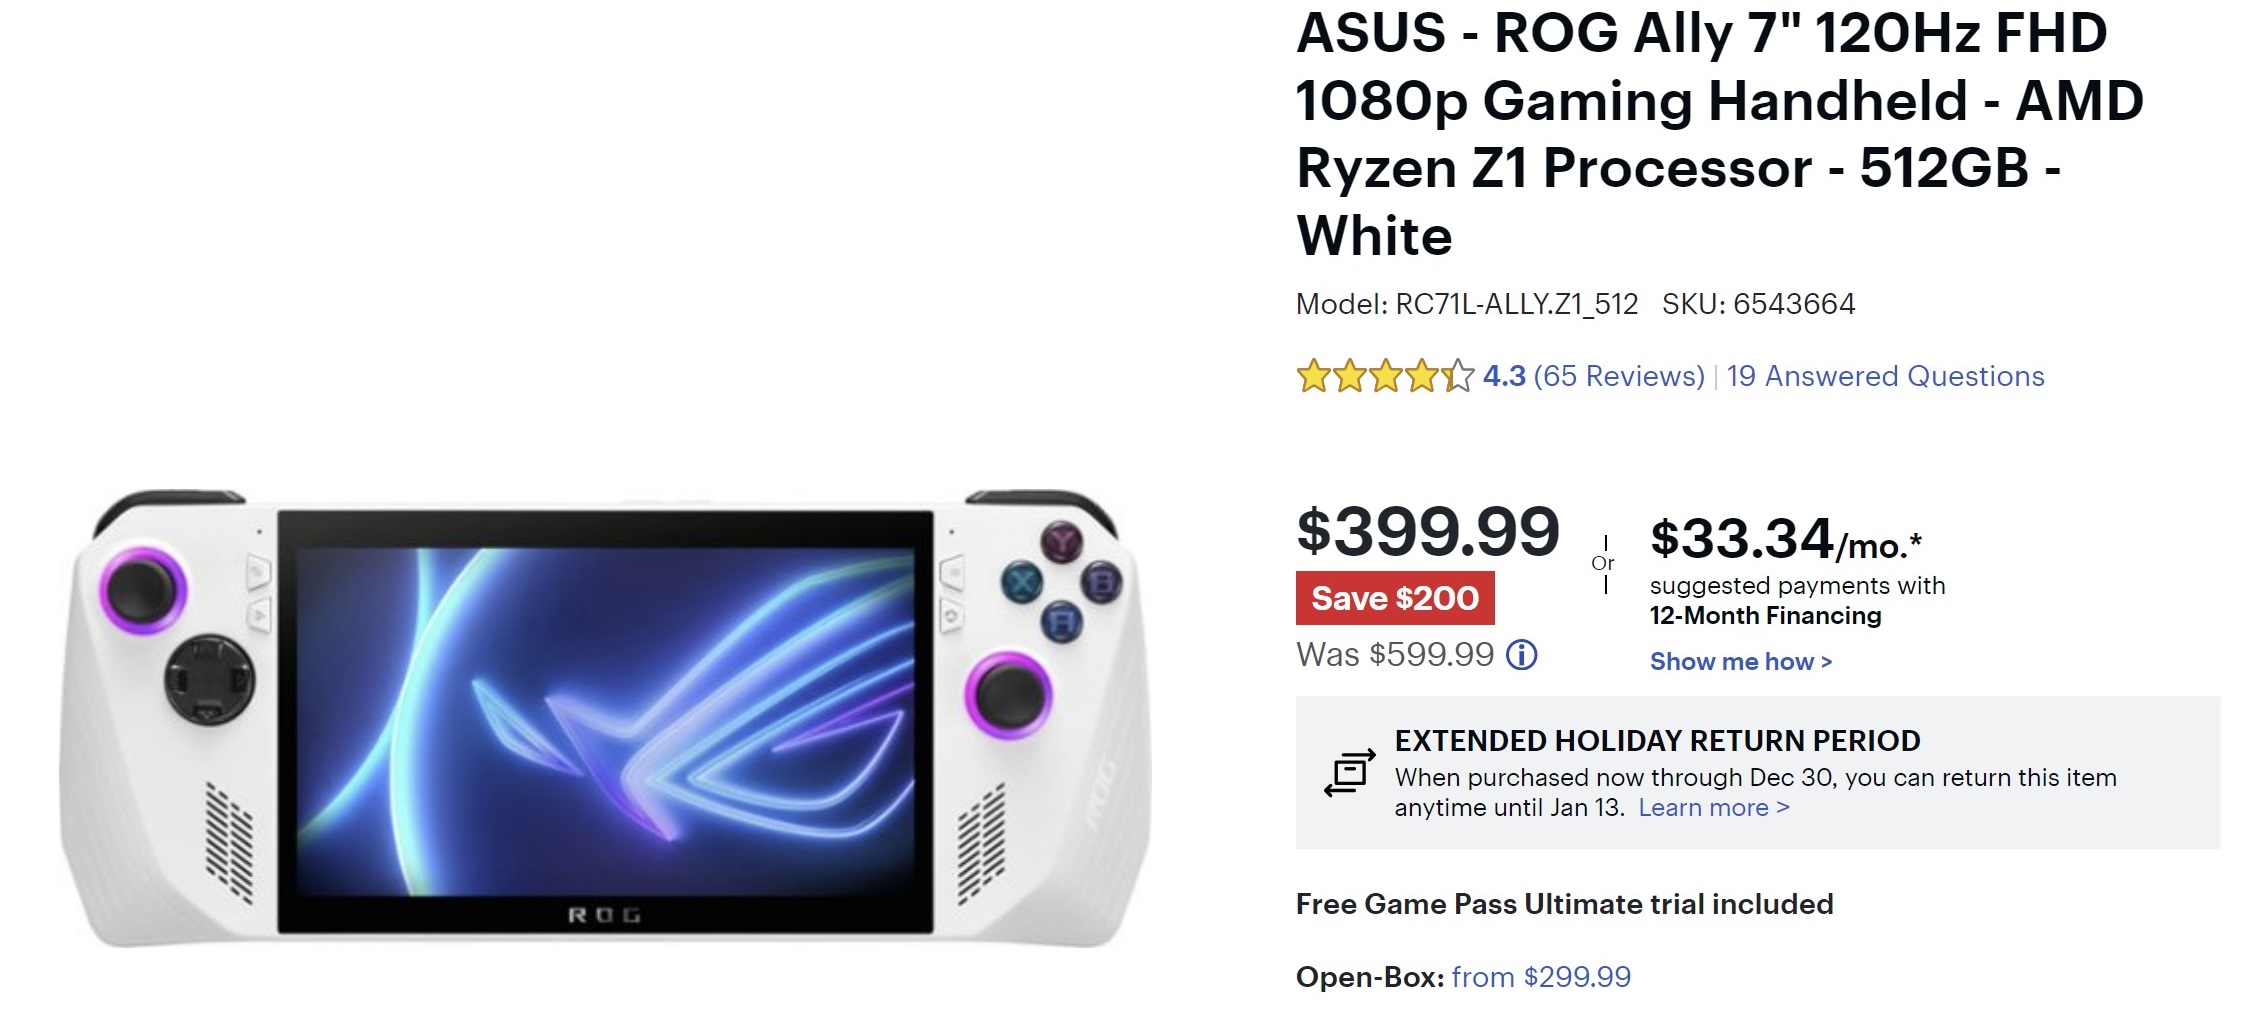 ASUS ROG Ally price and release date